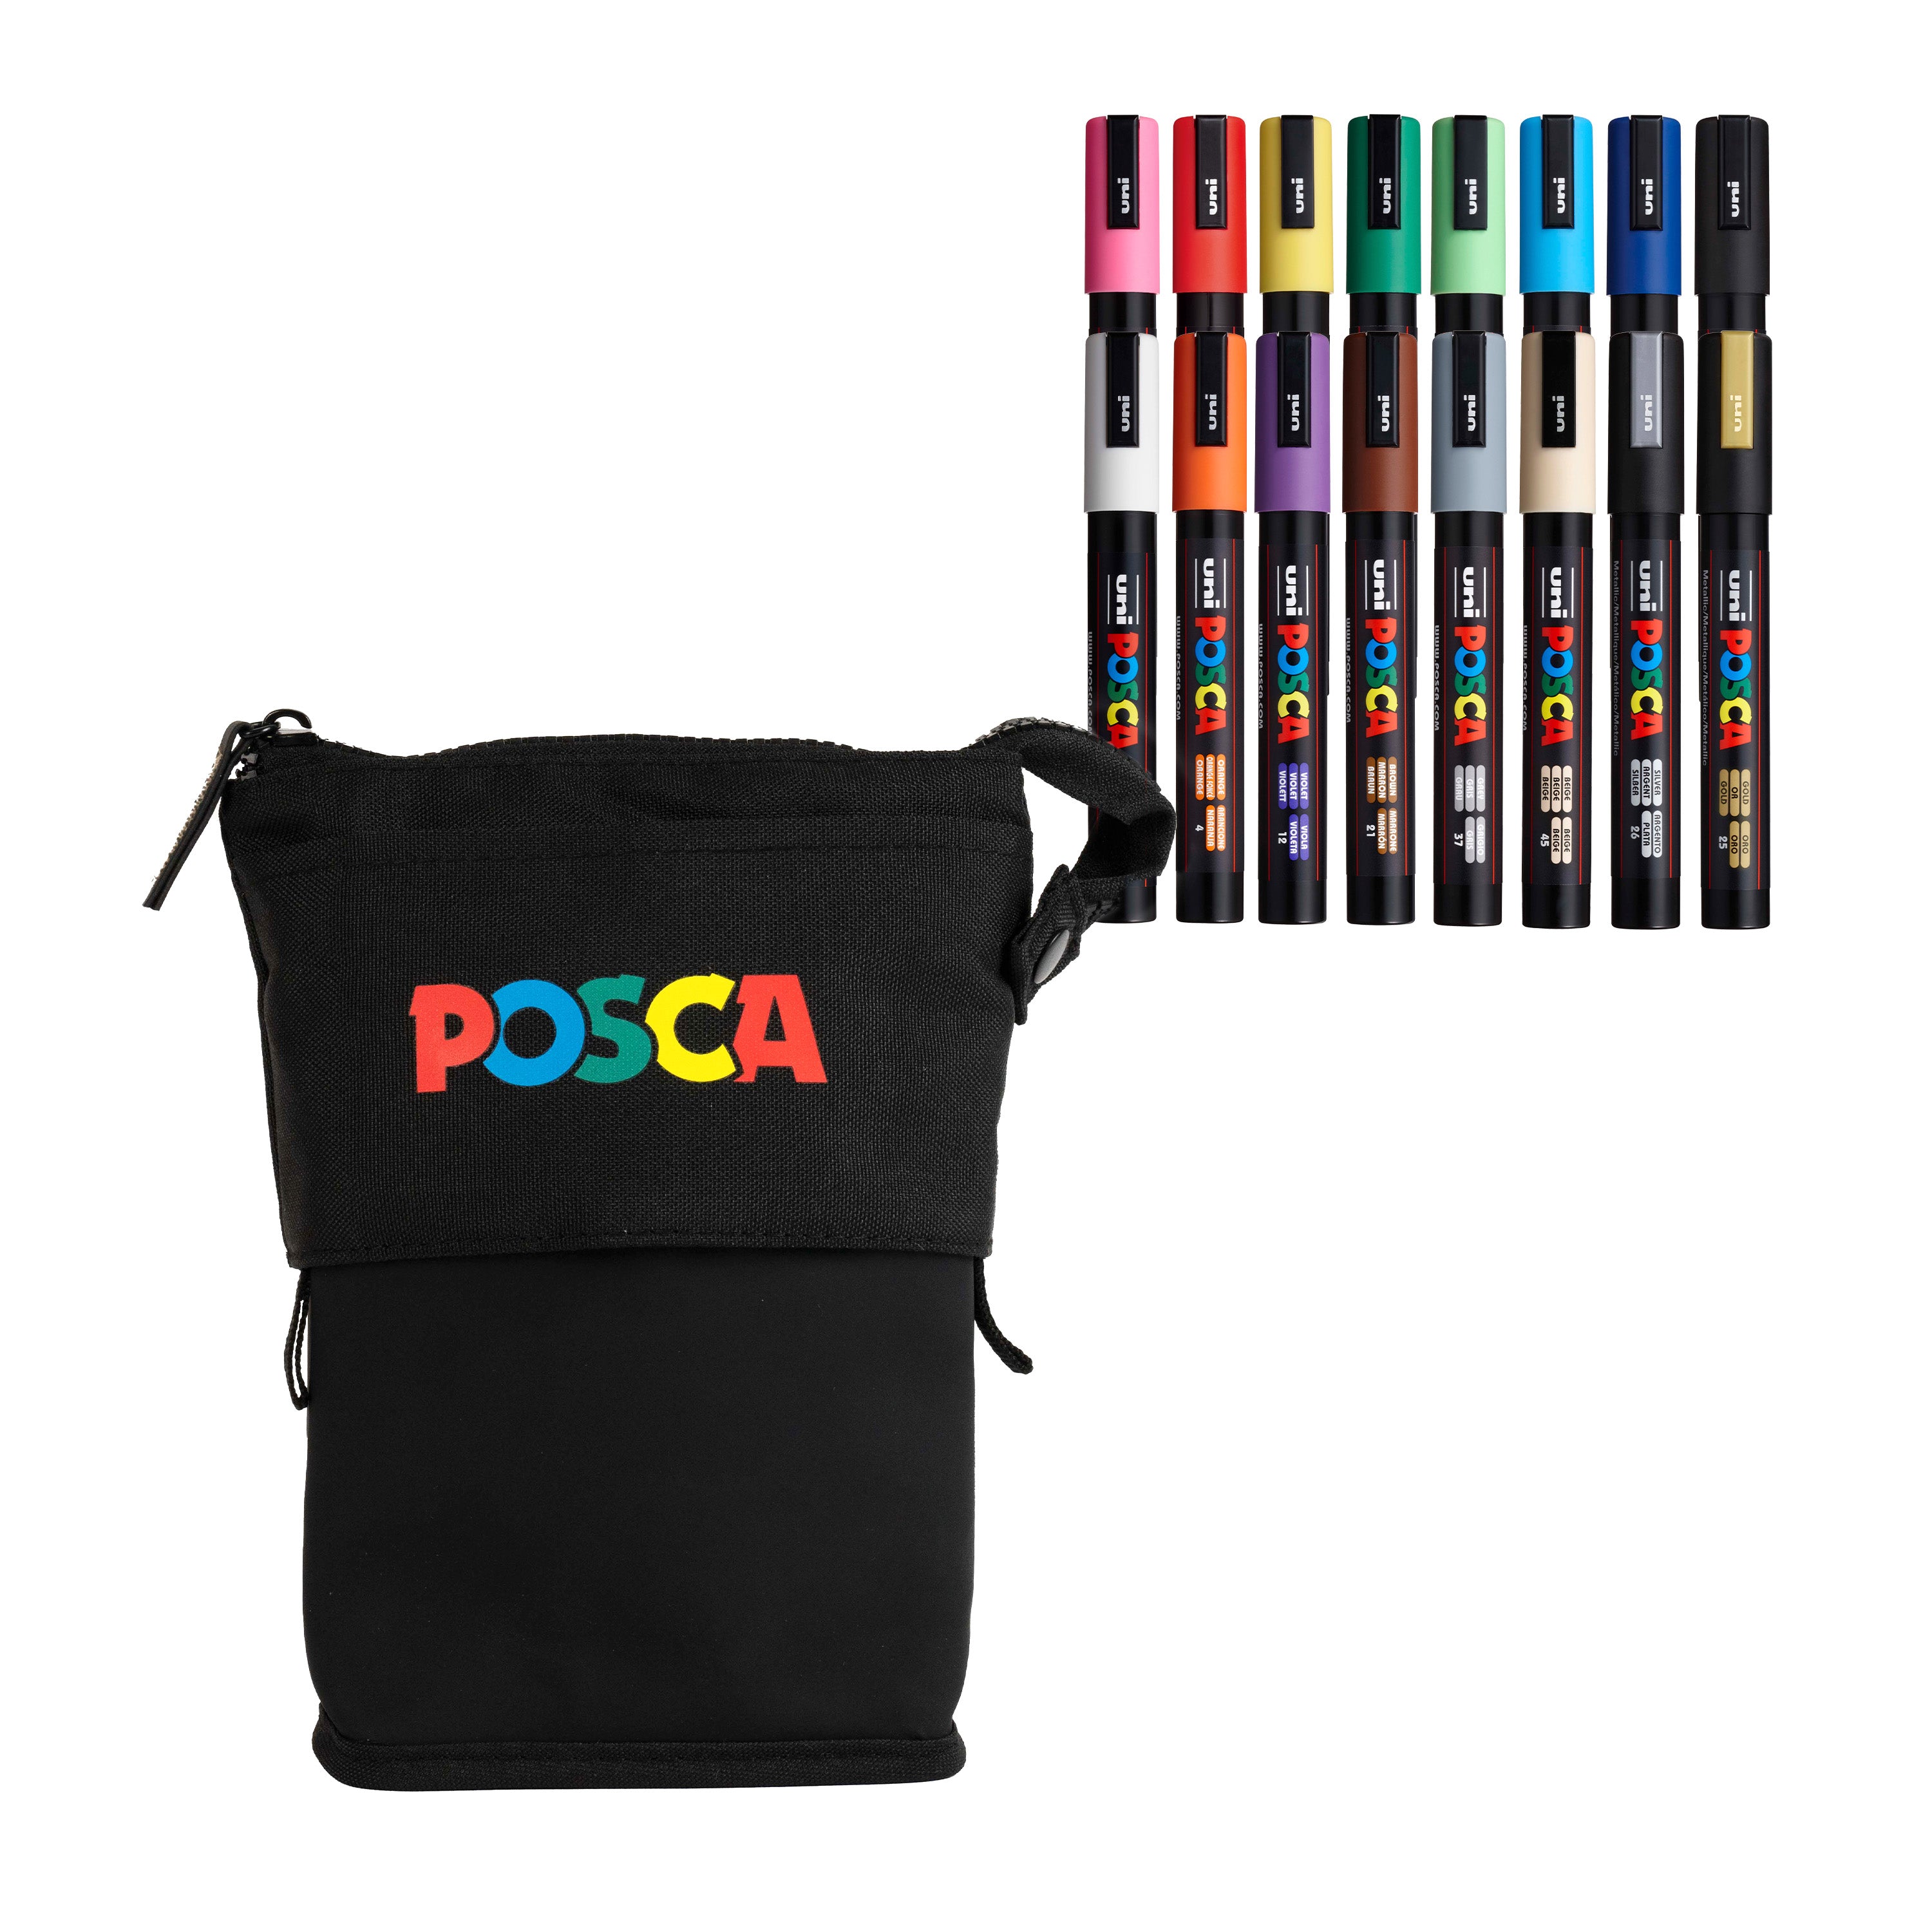 Buy the newest Posca Pc5M 16 Piece Assorted Set 959 products at